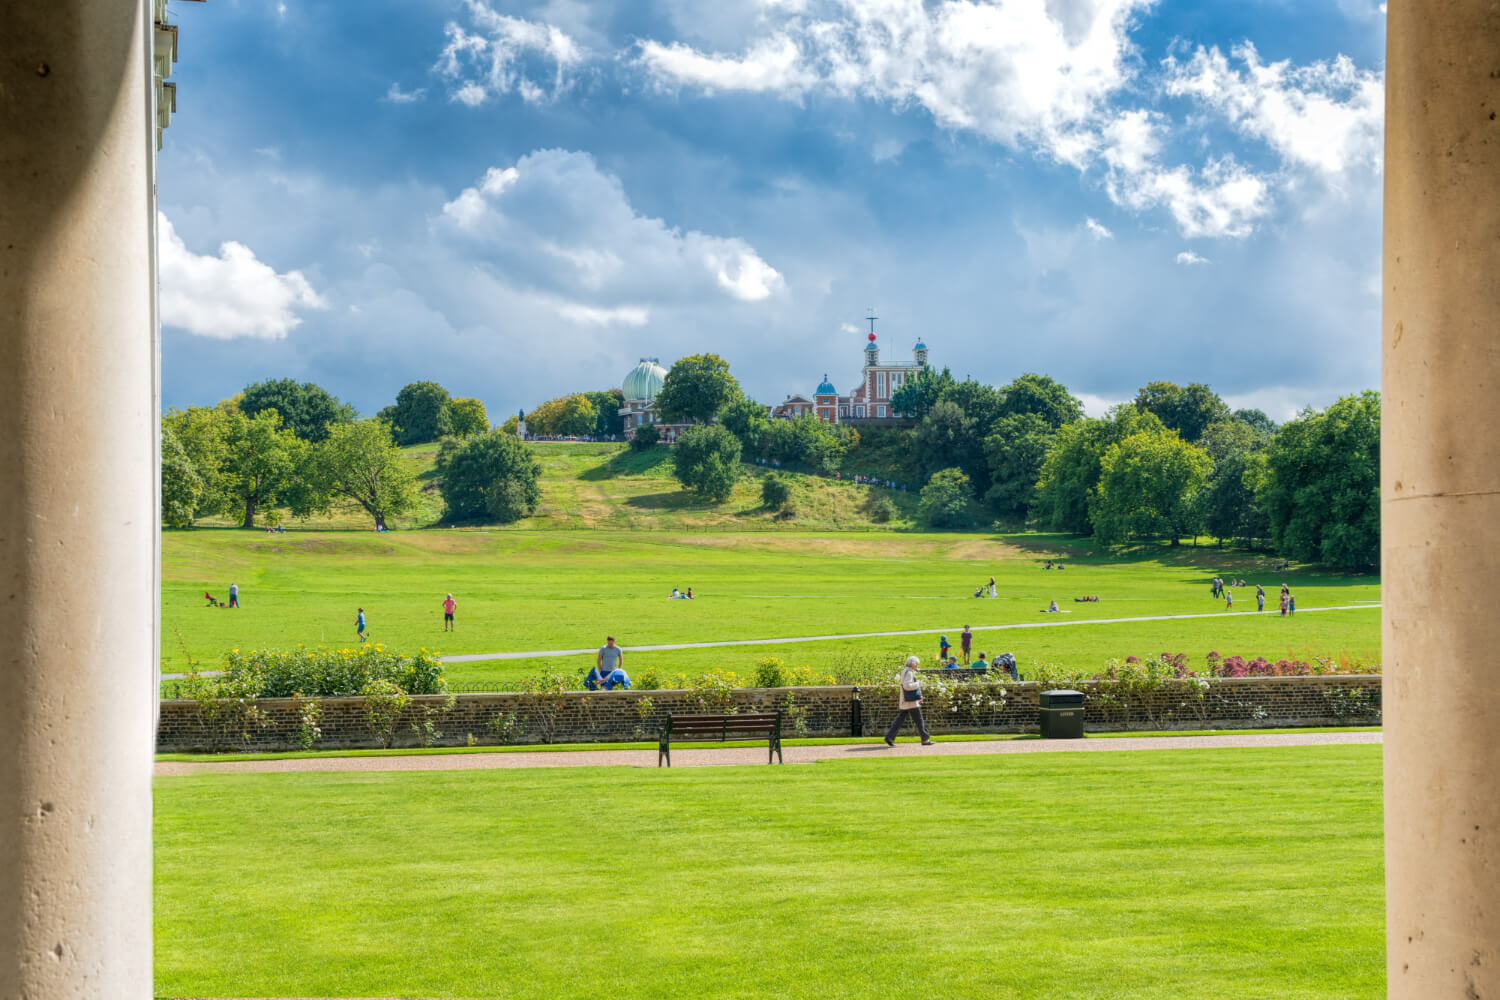 greenwich park in london is a great walking route to explore nature